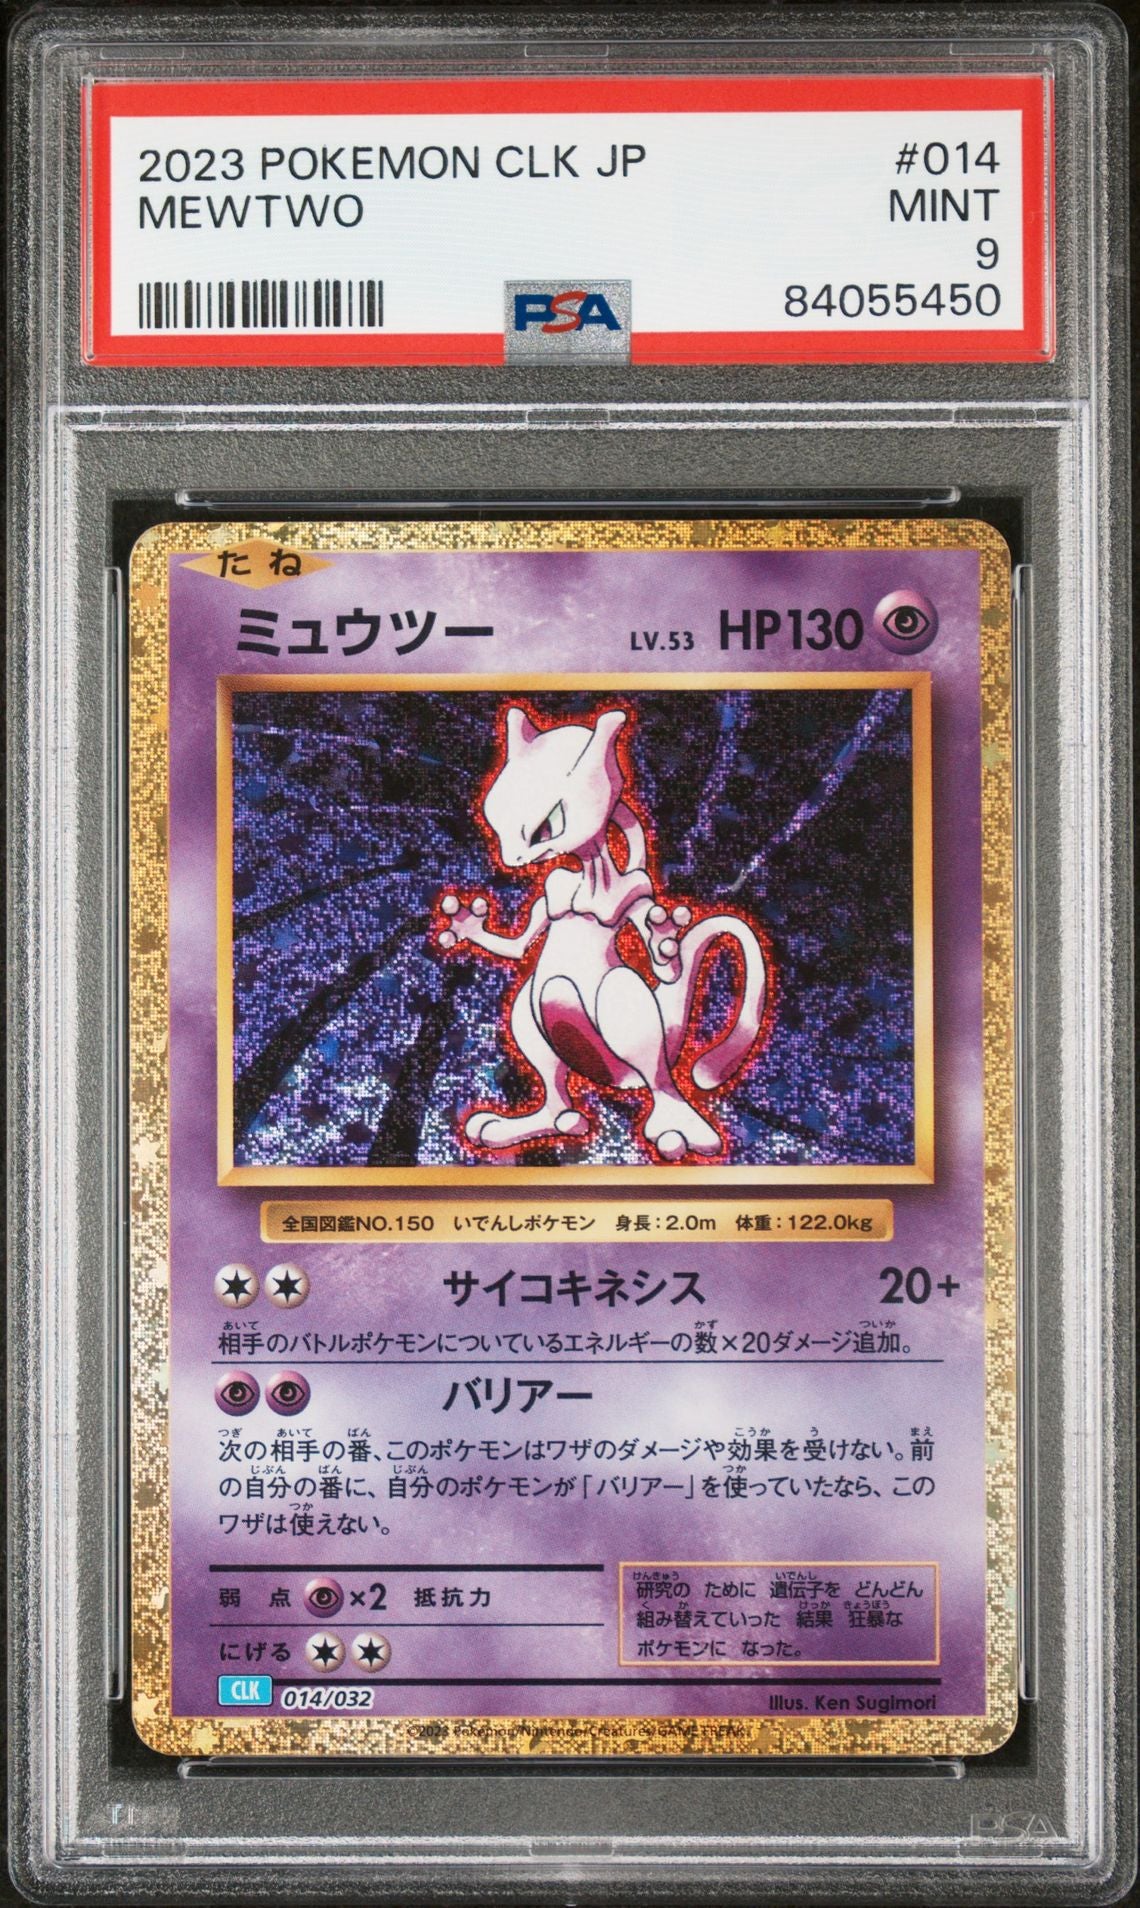 PSA 9 - Mewtwo 014/032 CLK Japanese Classic Collection  - Pokemon